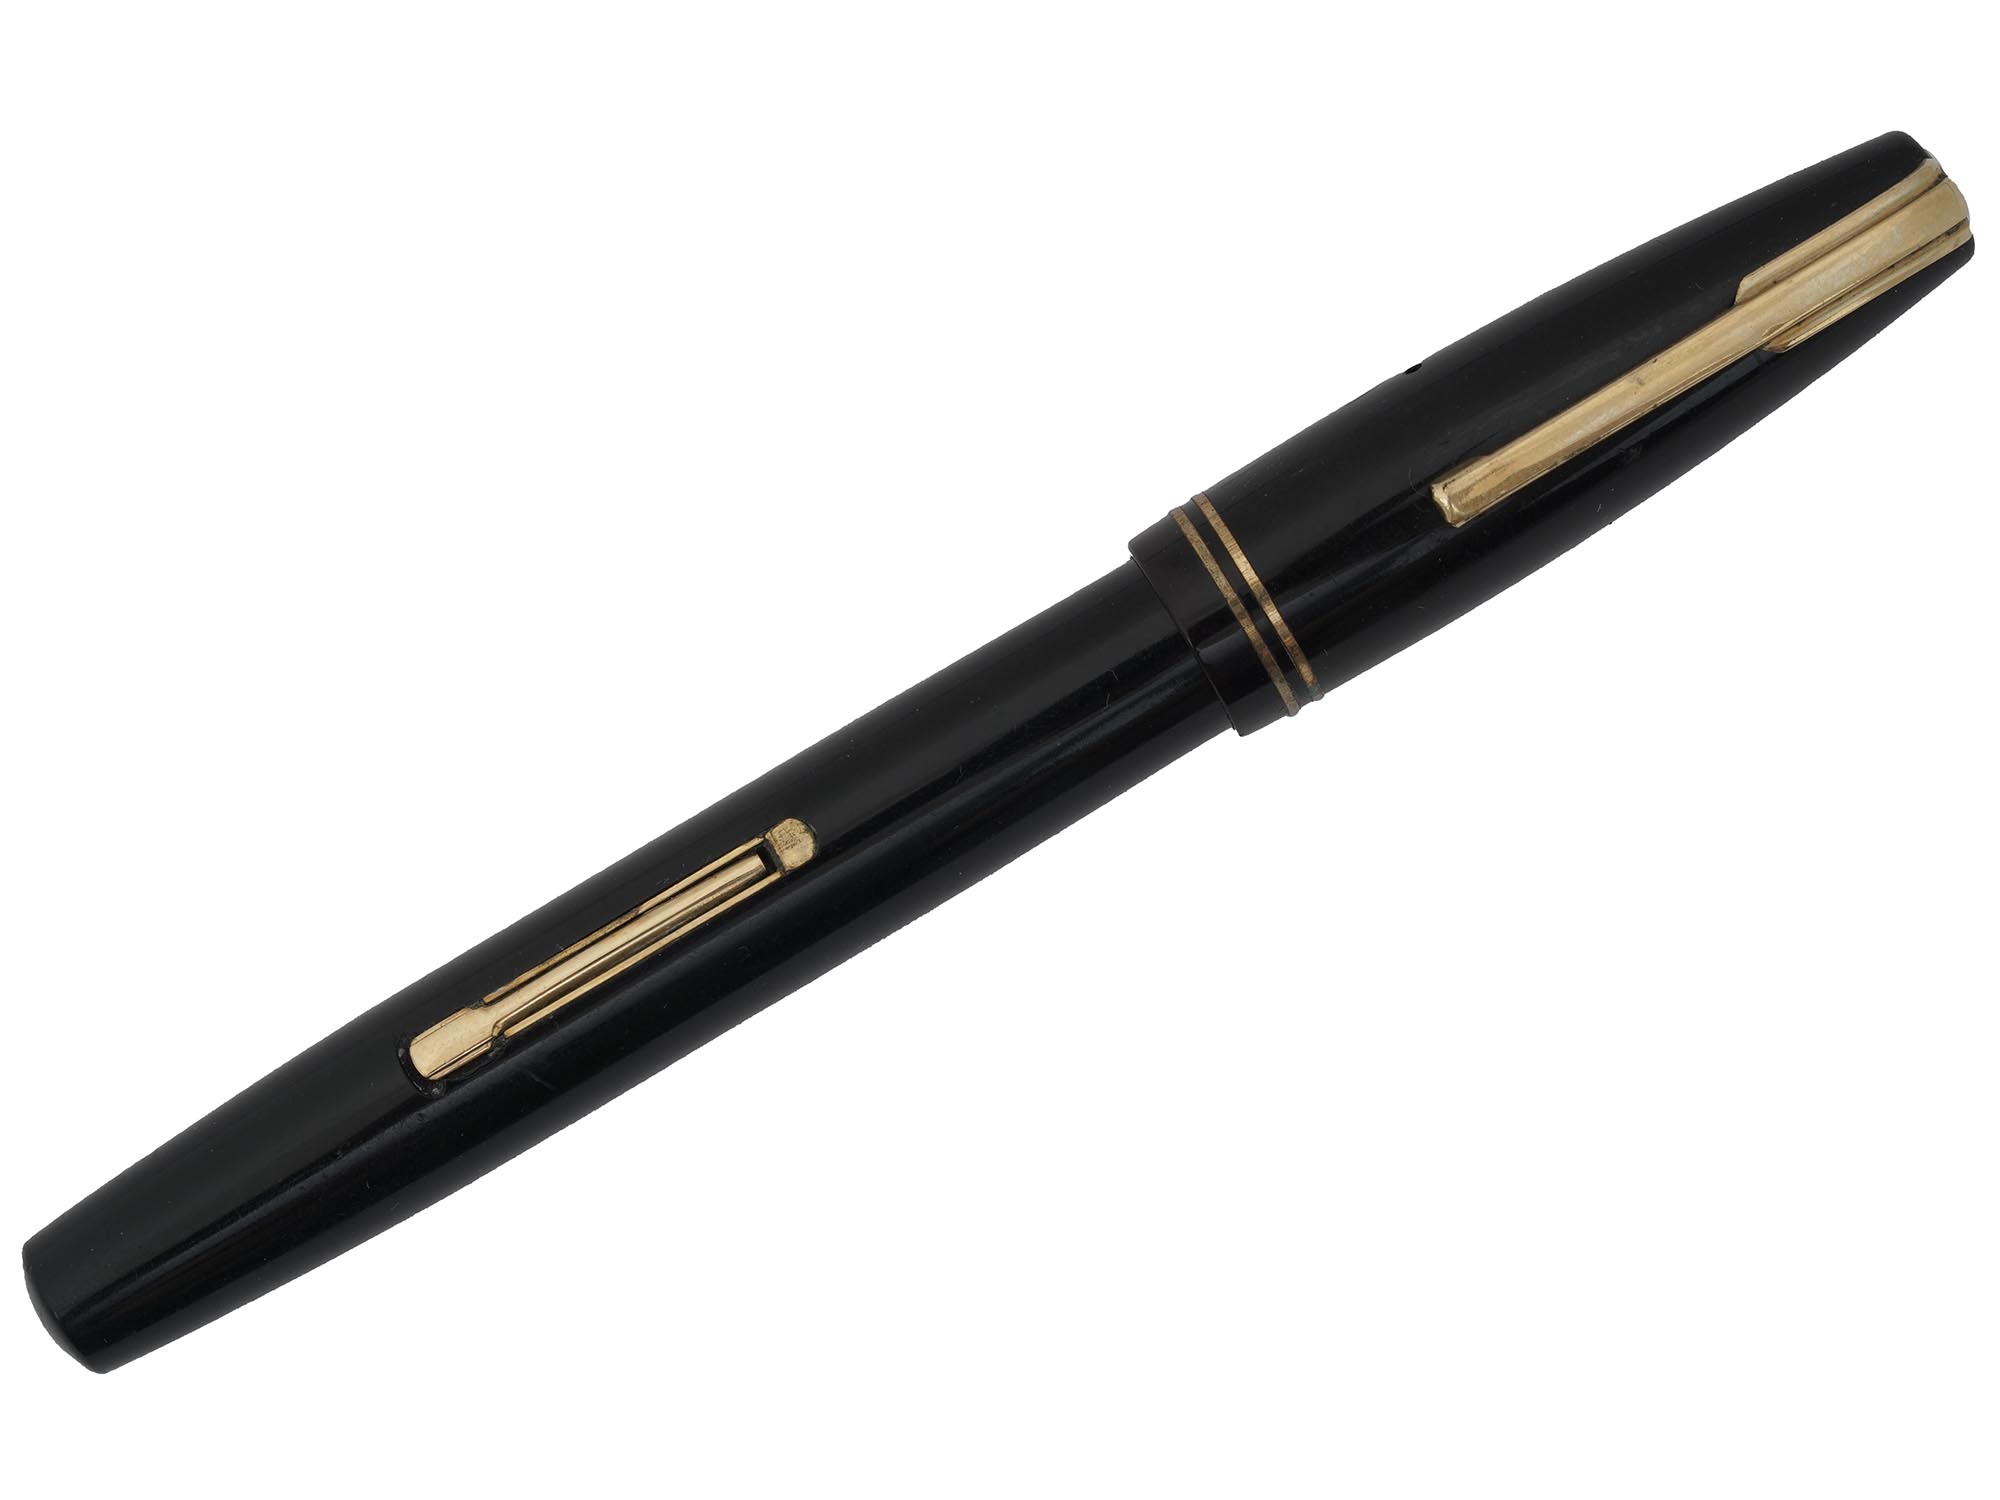 WELTYS CHICAGO 14K GOLD LEVER FILLER FOUNTAIN PEN PIC-0